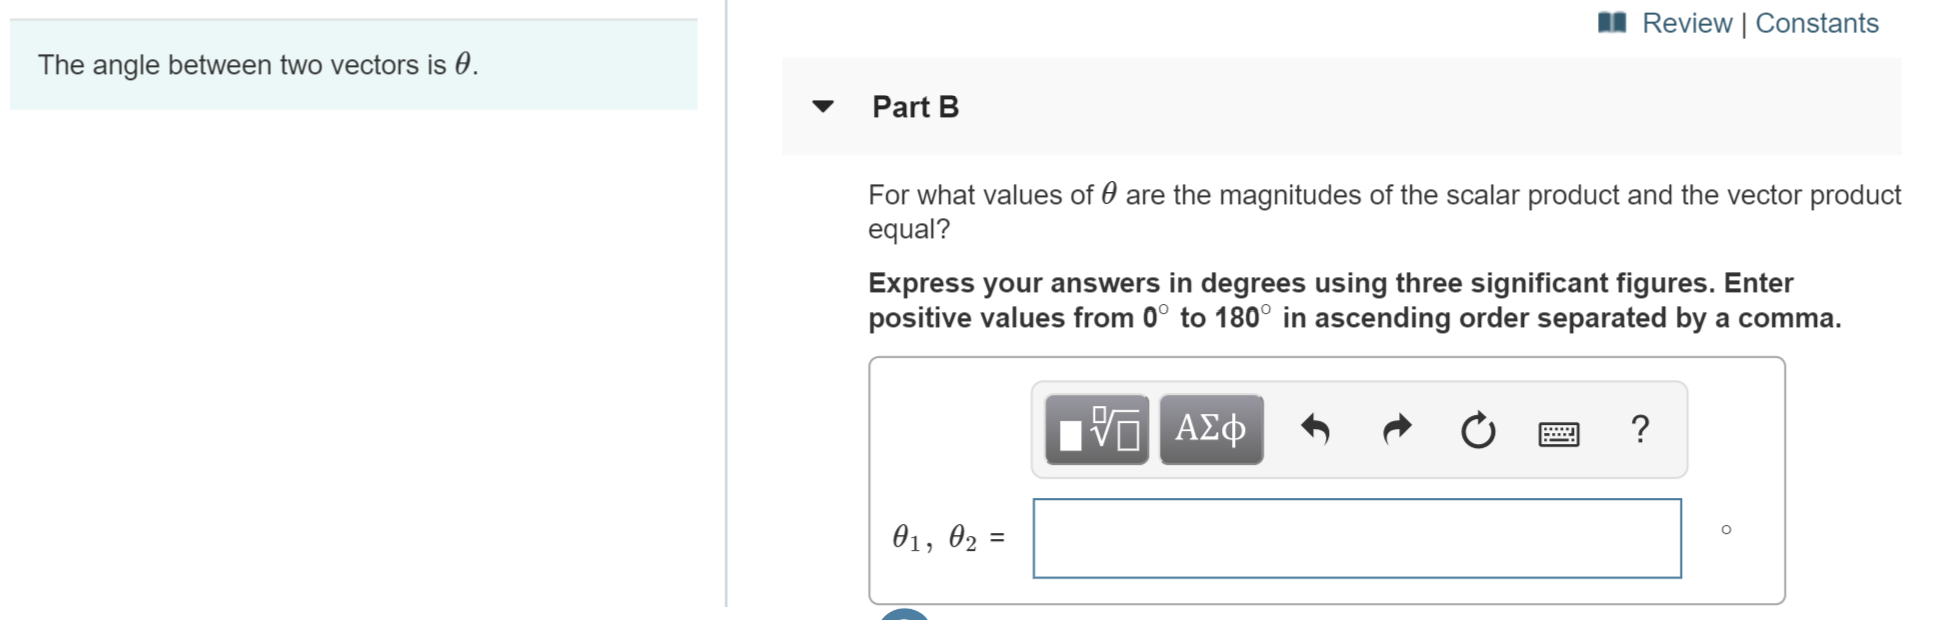 Review | Constants
The angle between two vectors is e
Part B
For what values of 0 are the magnitudes of the scalar product and the vector product
equal?
Express your answers in degrees using three significant figures. Enter
positive values from 0° to 180° in ascending order separated by a comma.
AD
?
01, 02
II
